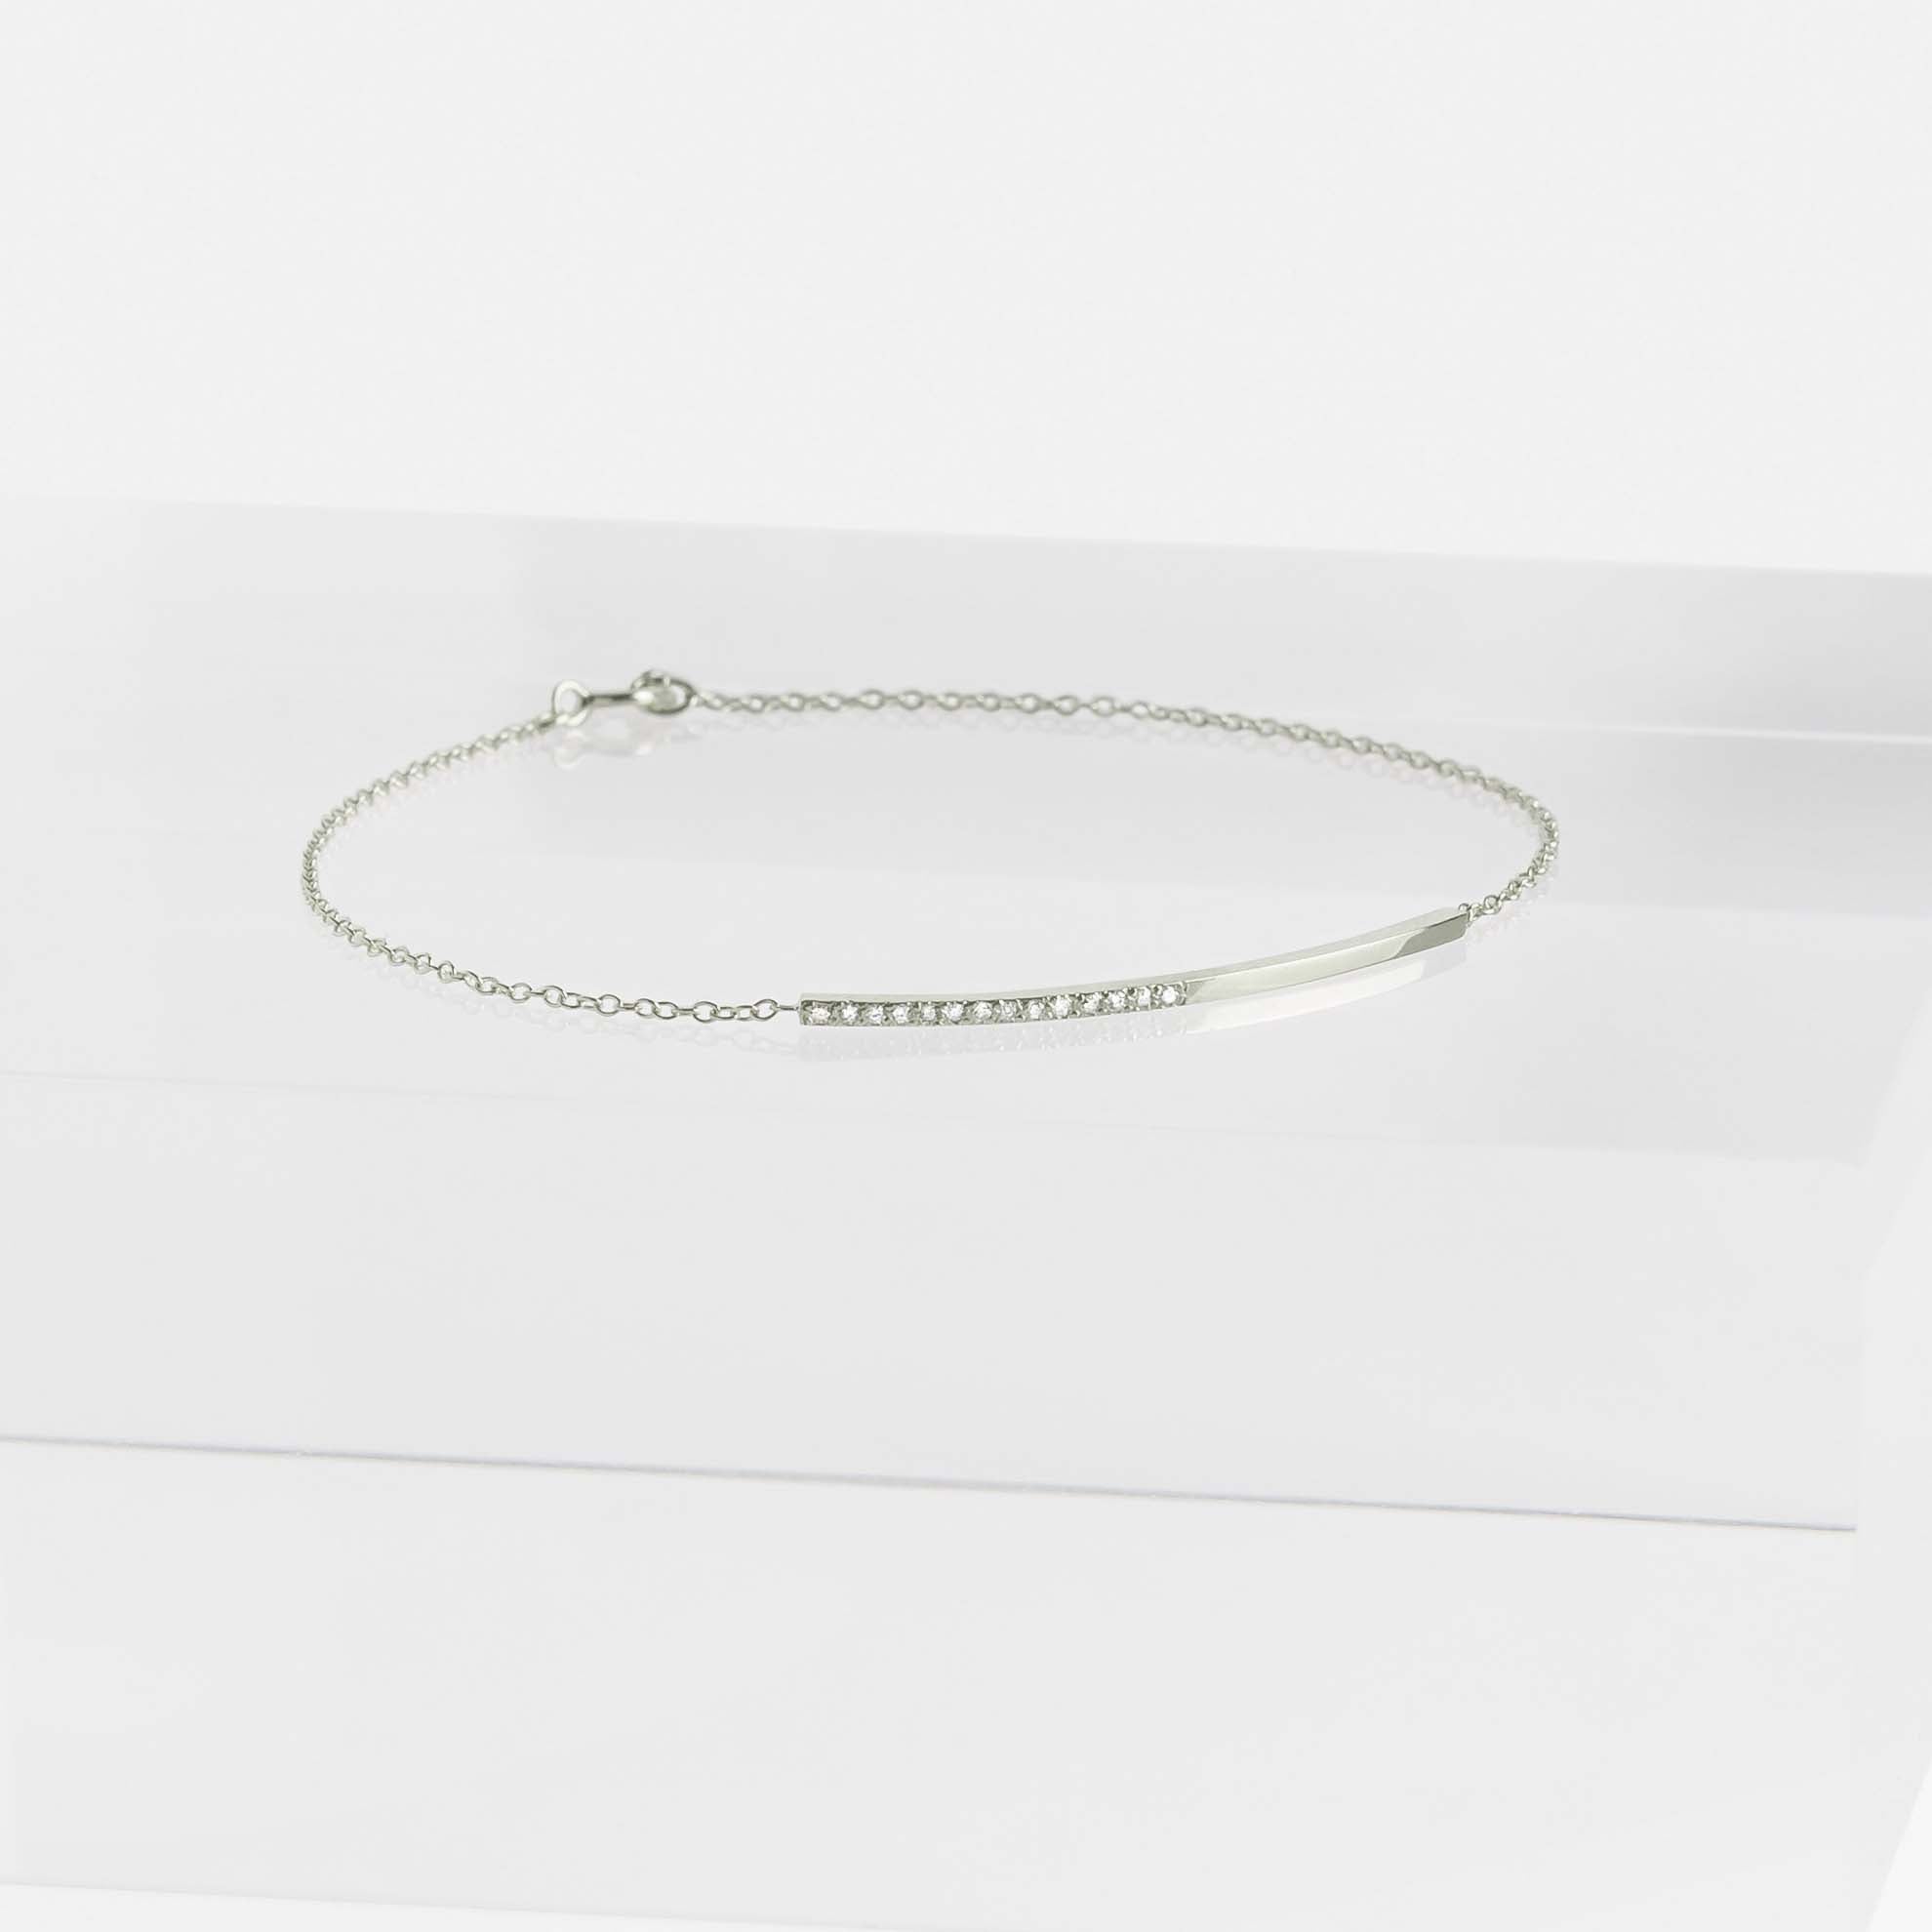 Iva Simple Bracelet in 14k White Gold set with White Diamonds By SHW Fine Jewelry NYC